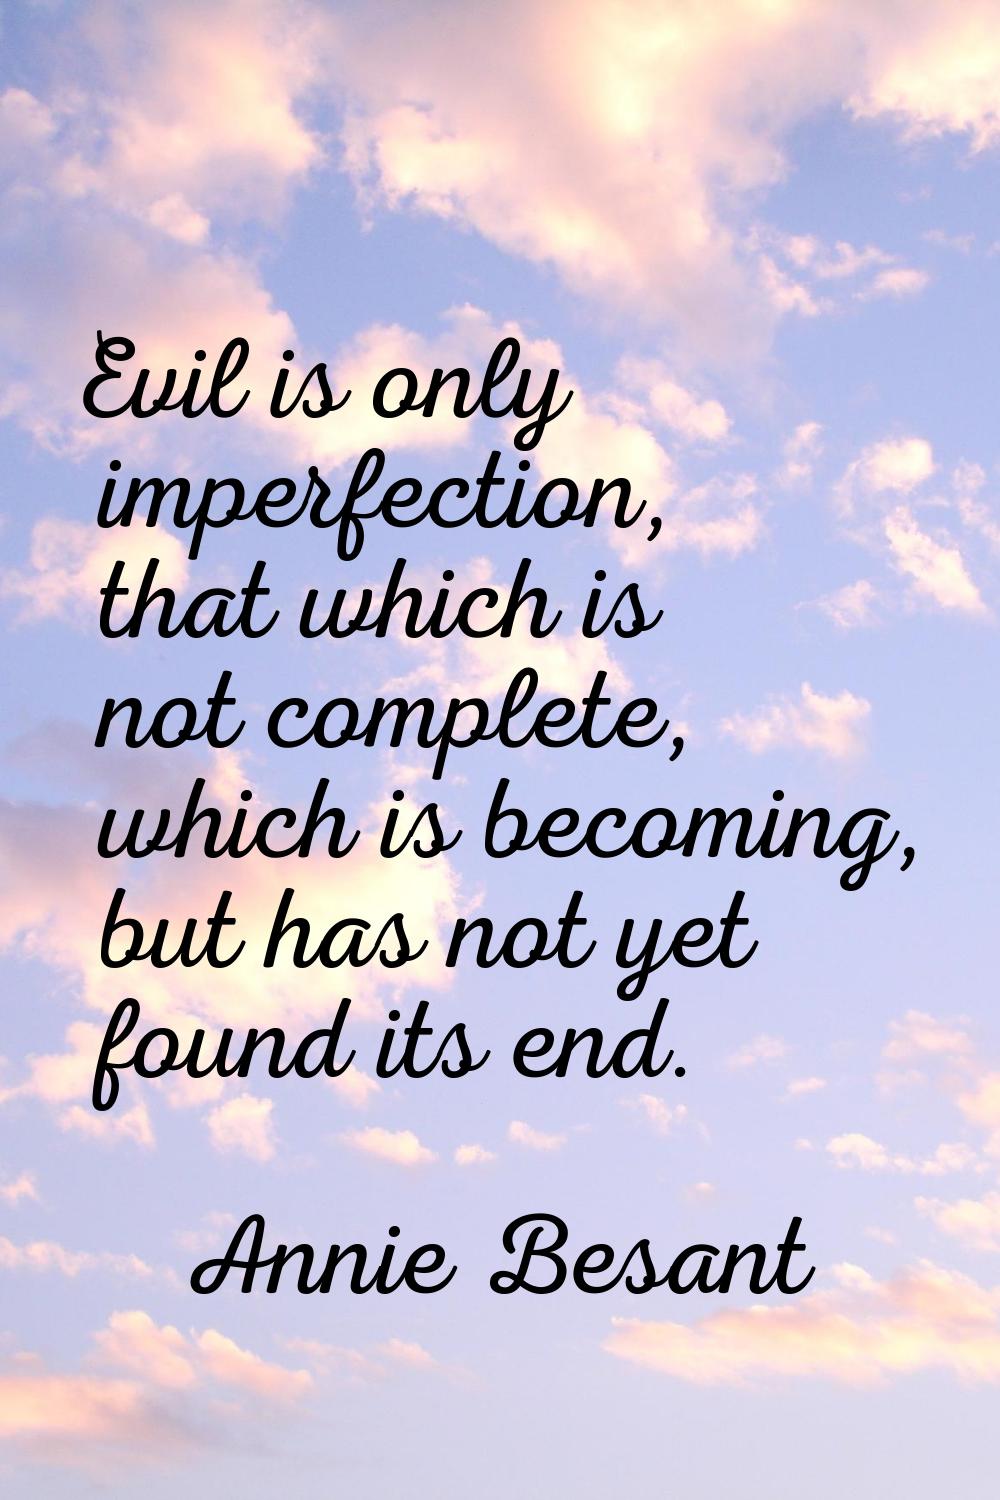 Evil is only imperfection, that which is not complete, which is becoming, but has not yet found its